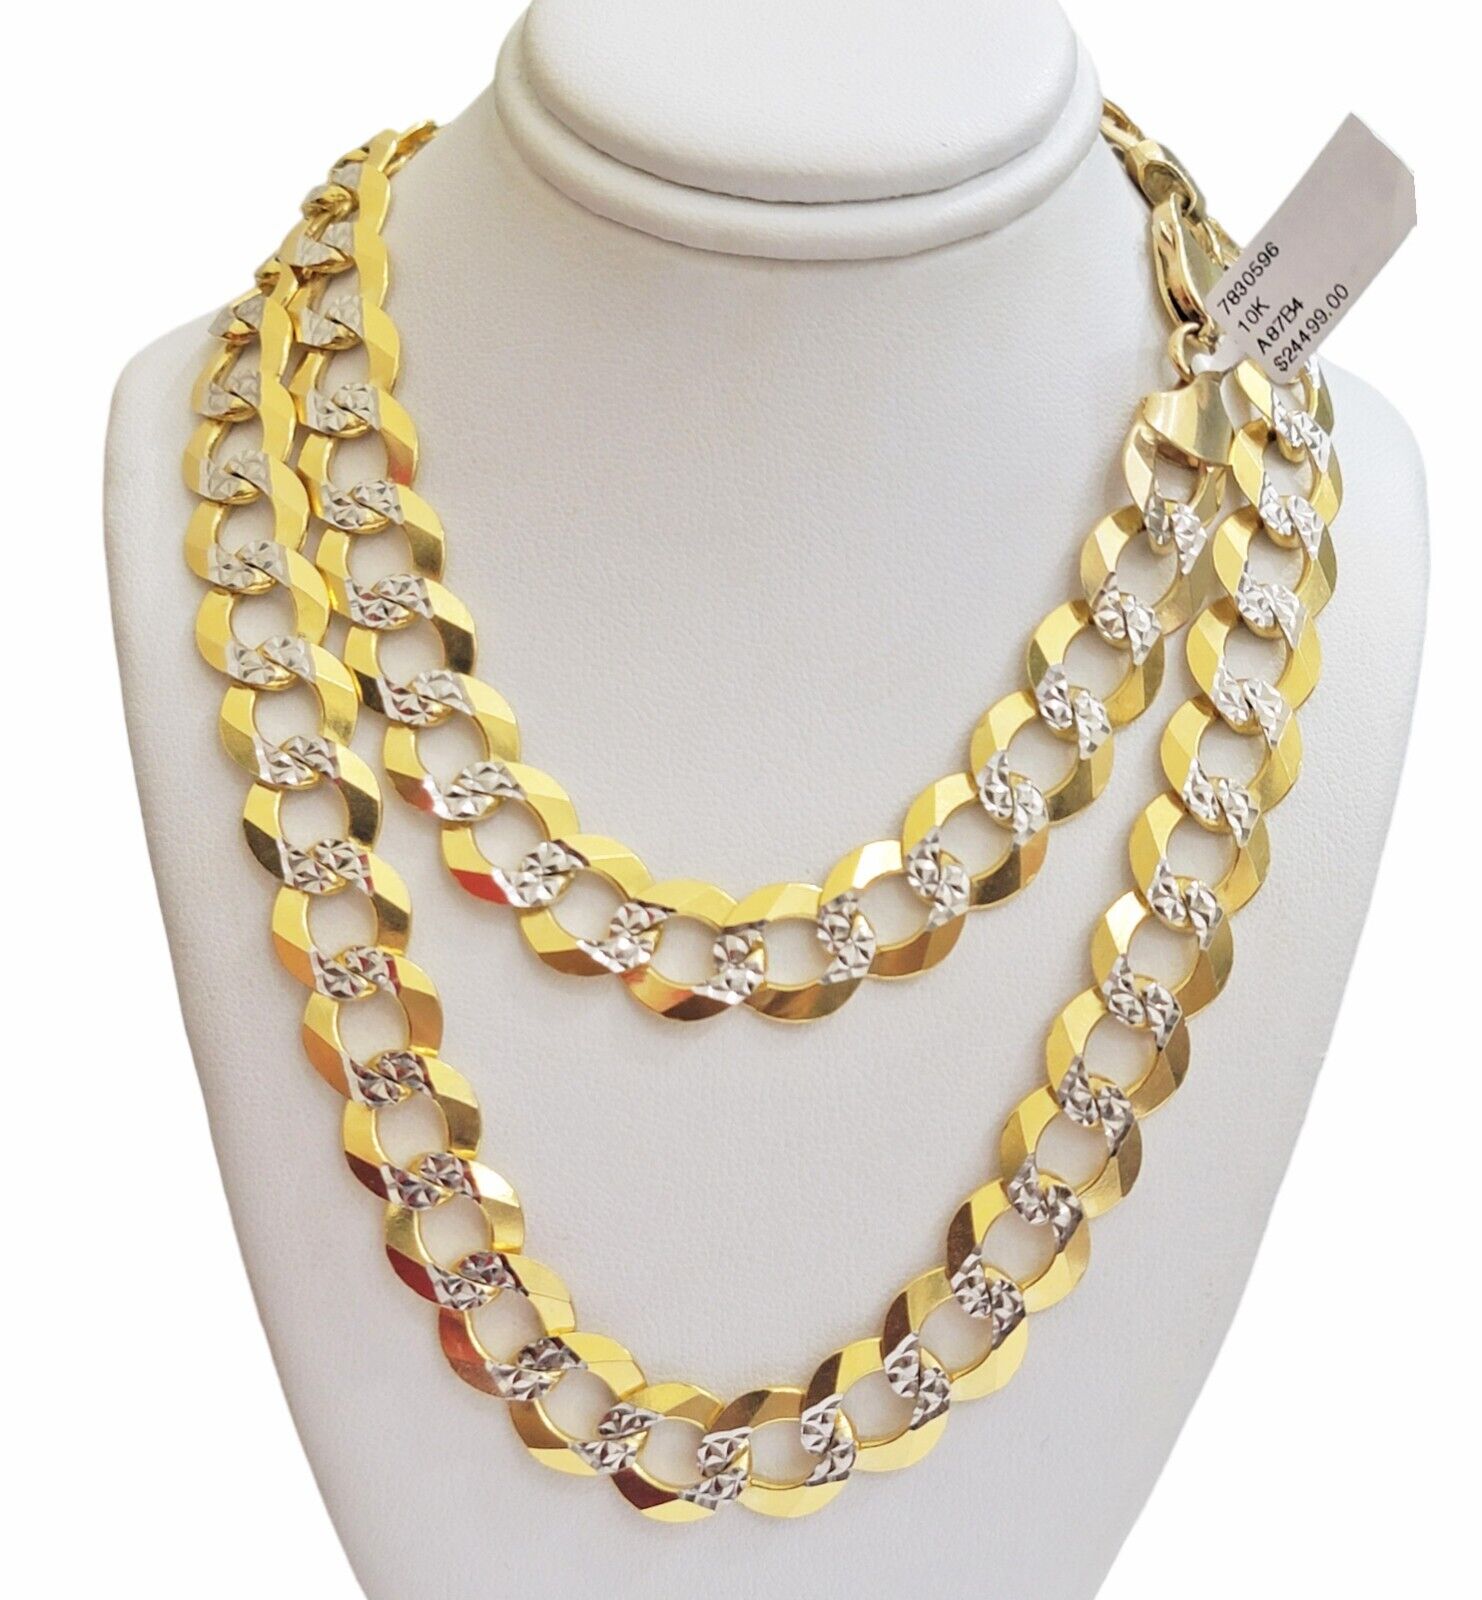 Cuban Curb Link Chain Necklace 26" 12.5mm Diamond Cut Solid 10k Yellow Gold REAL